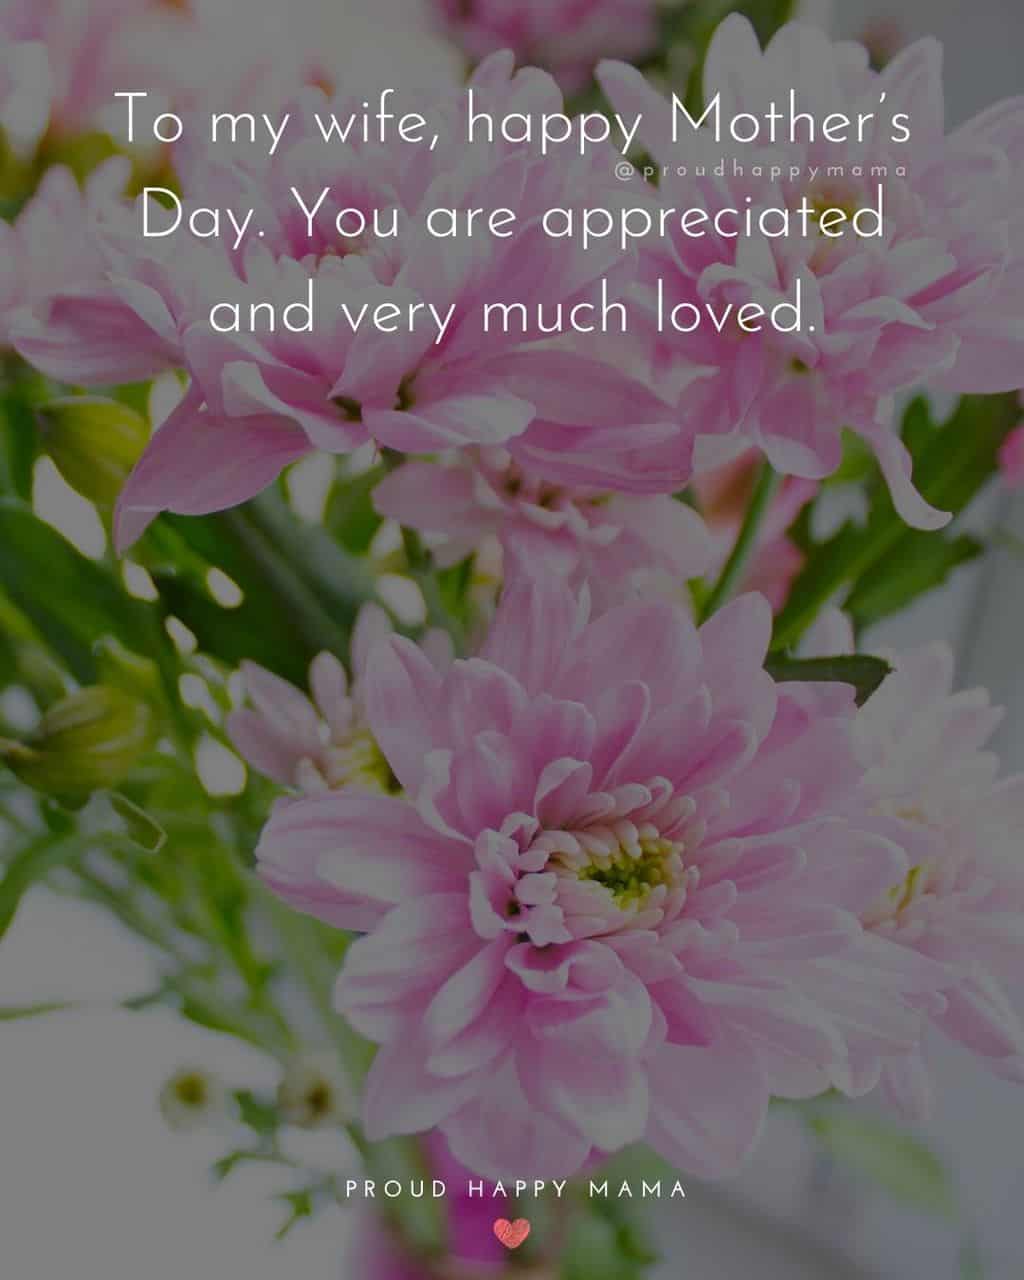 Happy Mothers Day Quotes For Wife - To my wife, happy Mother’s Day. You are appreciated and very much loved.’